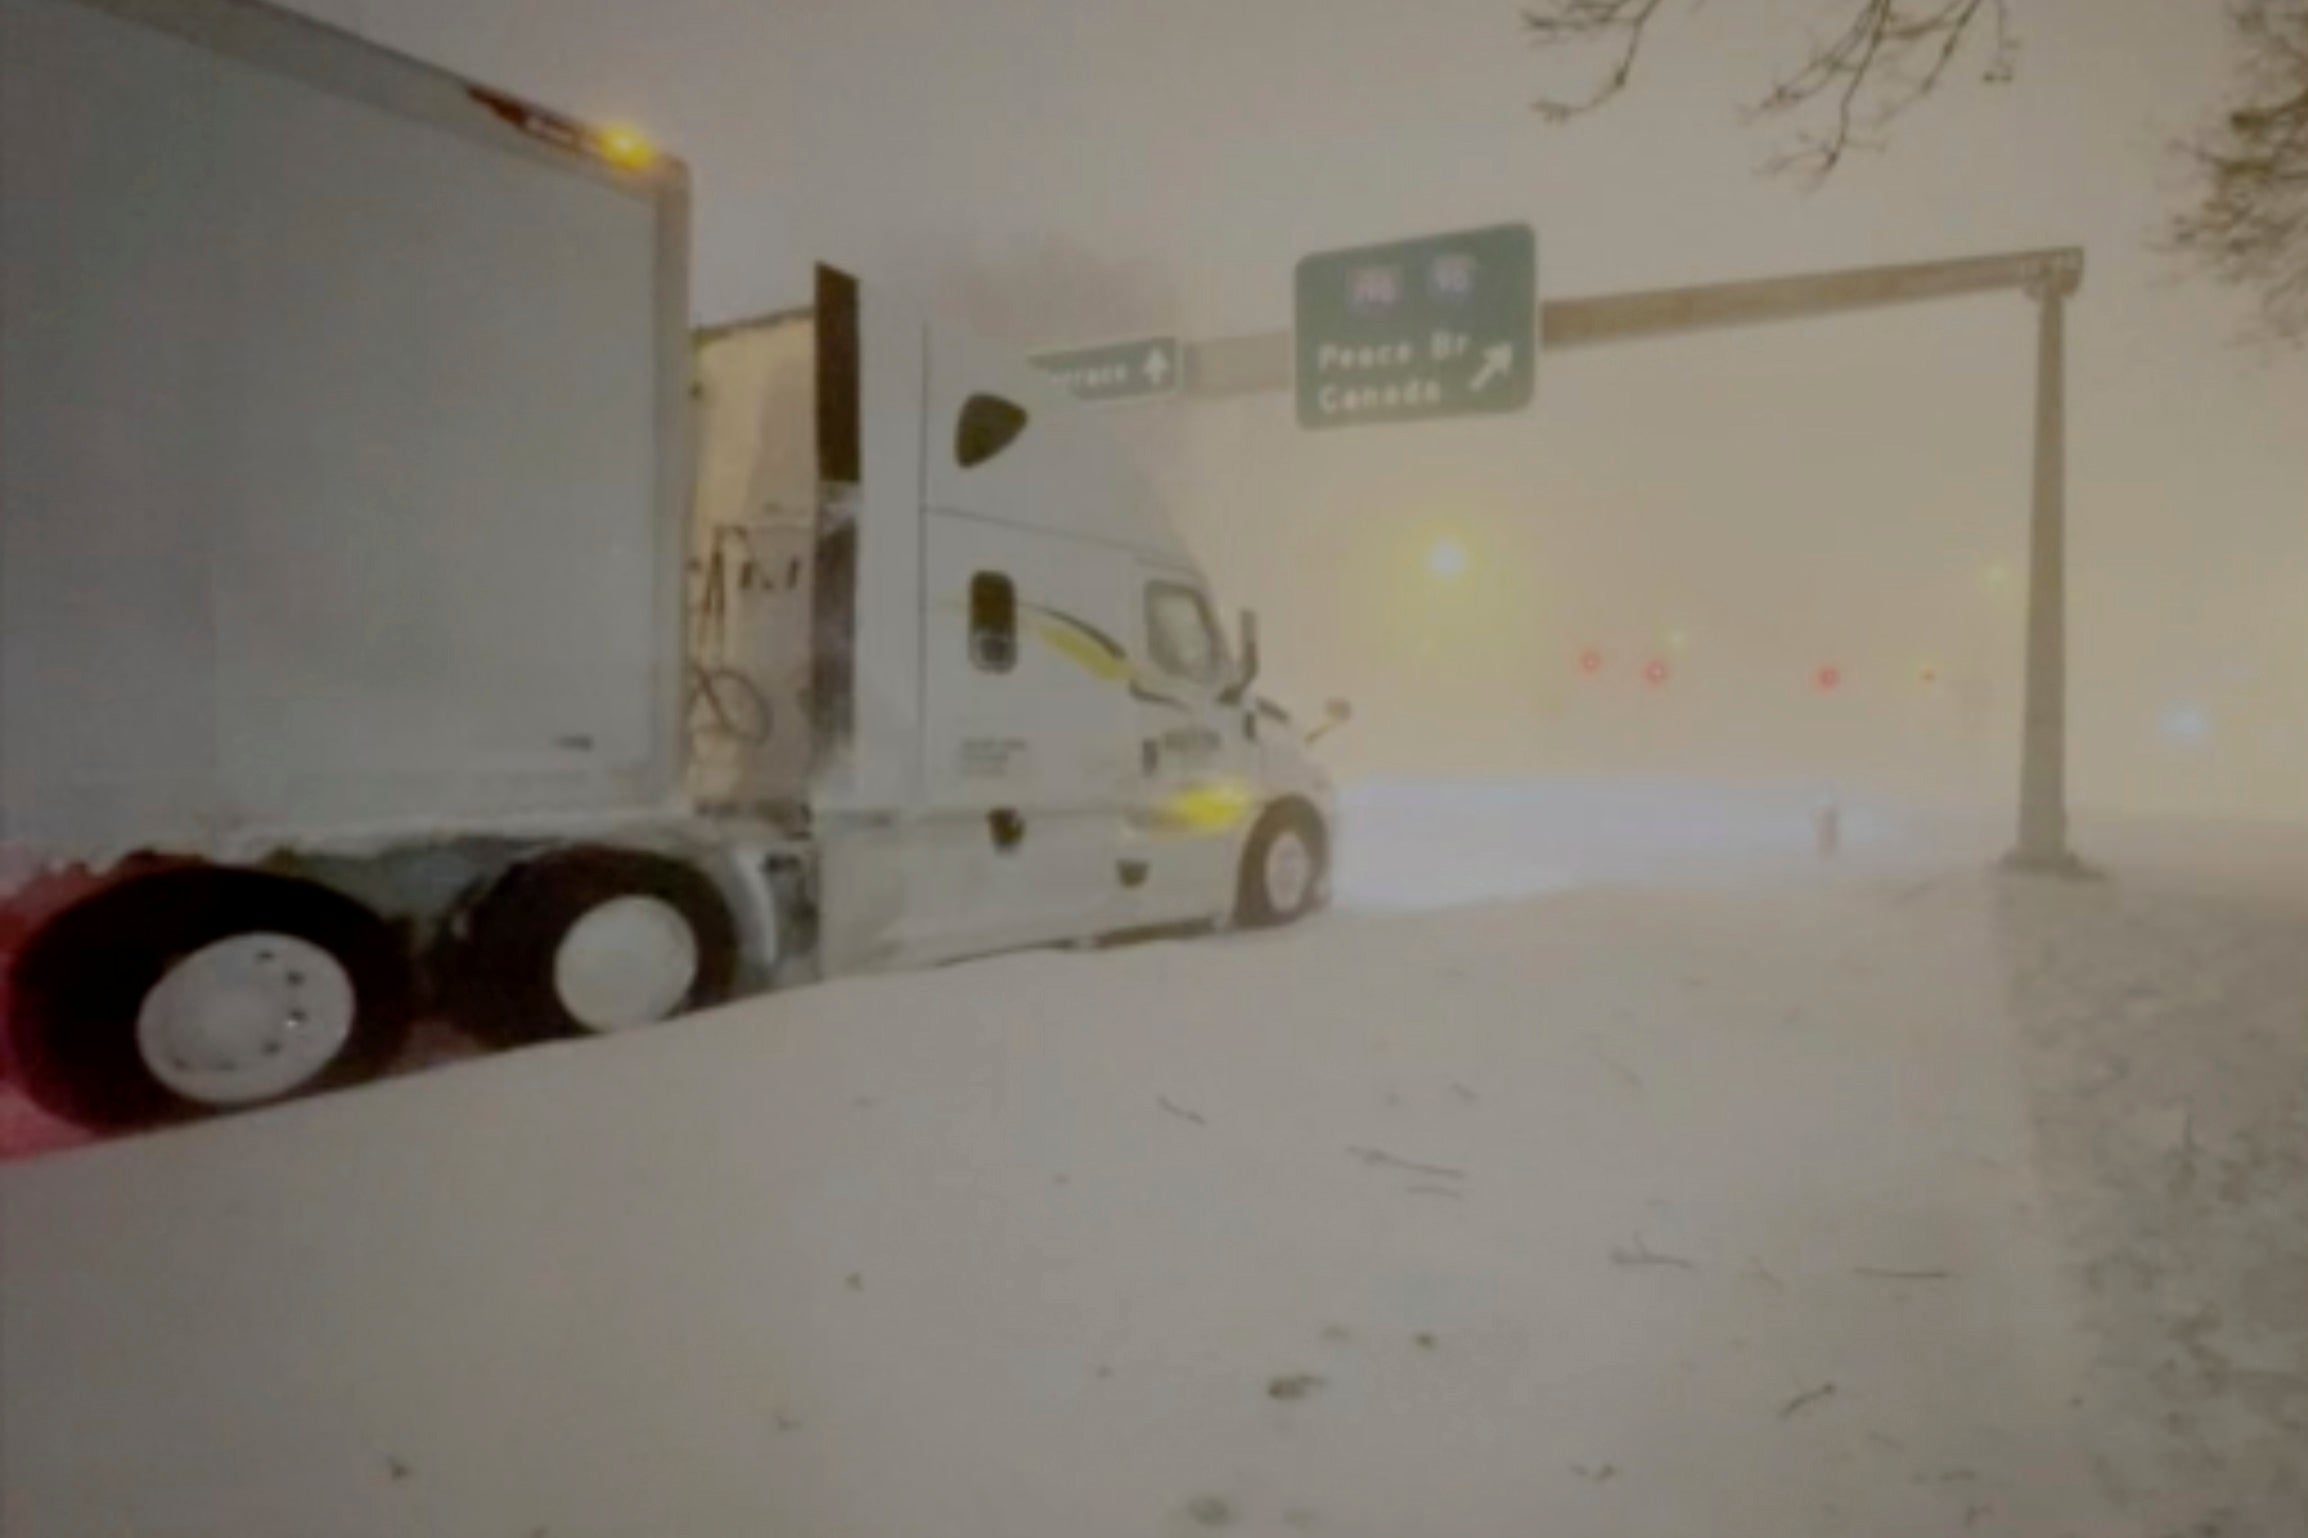 Hurricane-force winds and snow caused whiteout conditions in Buffalo, New York